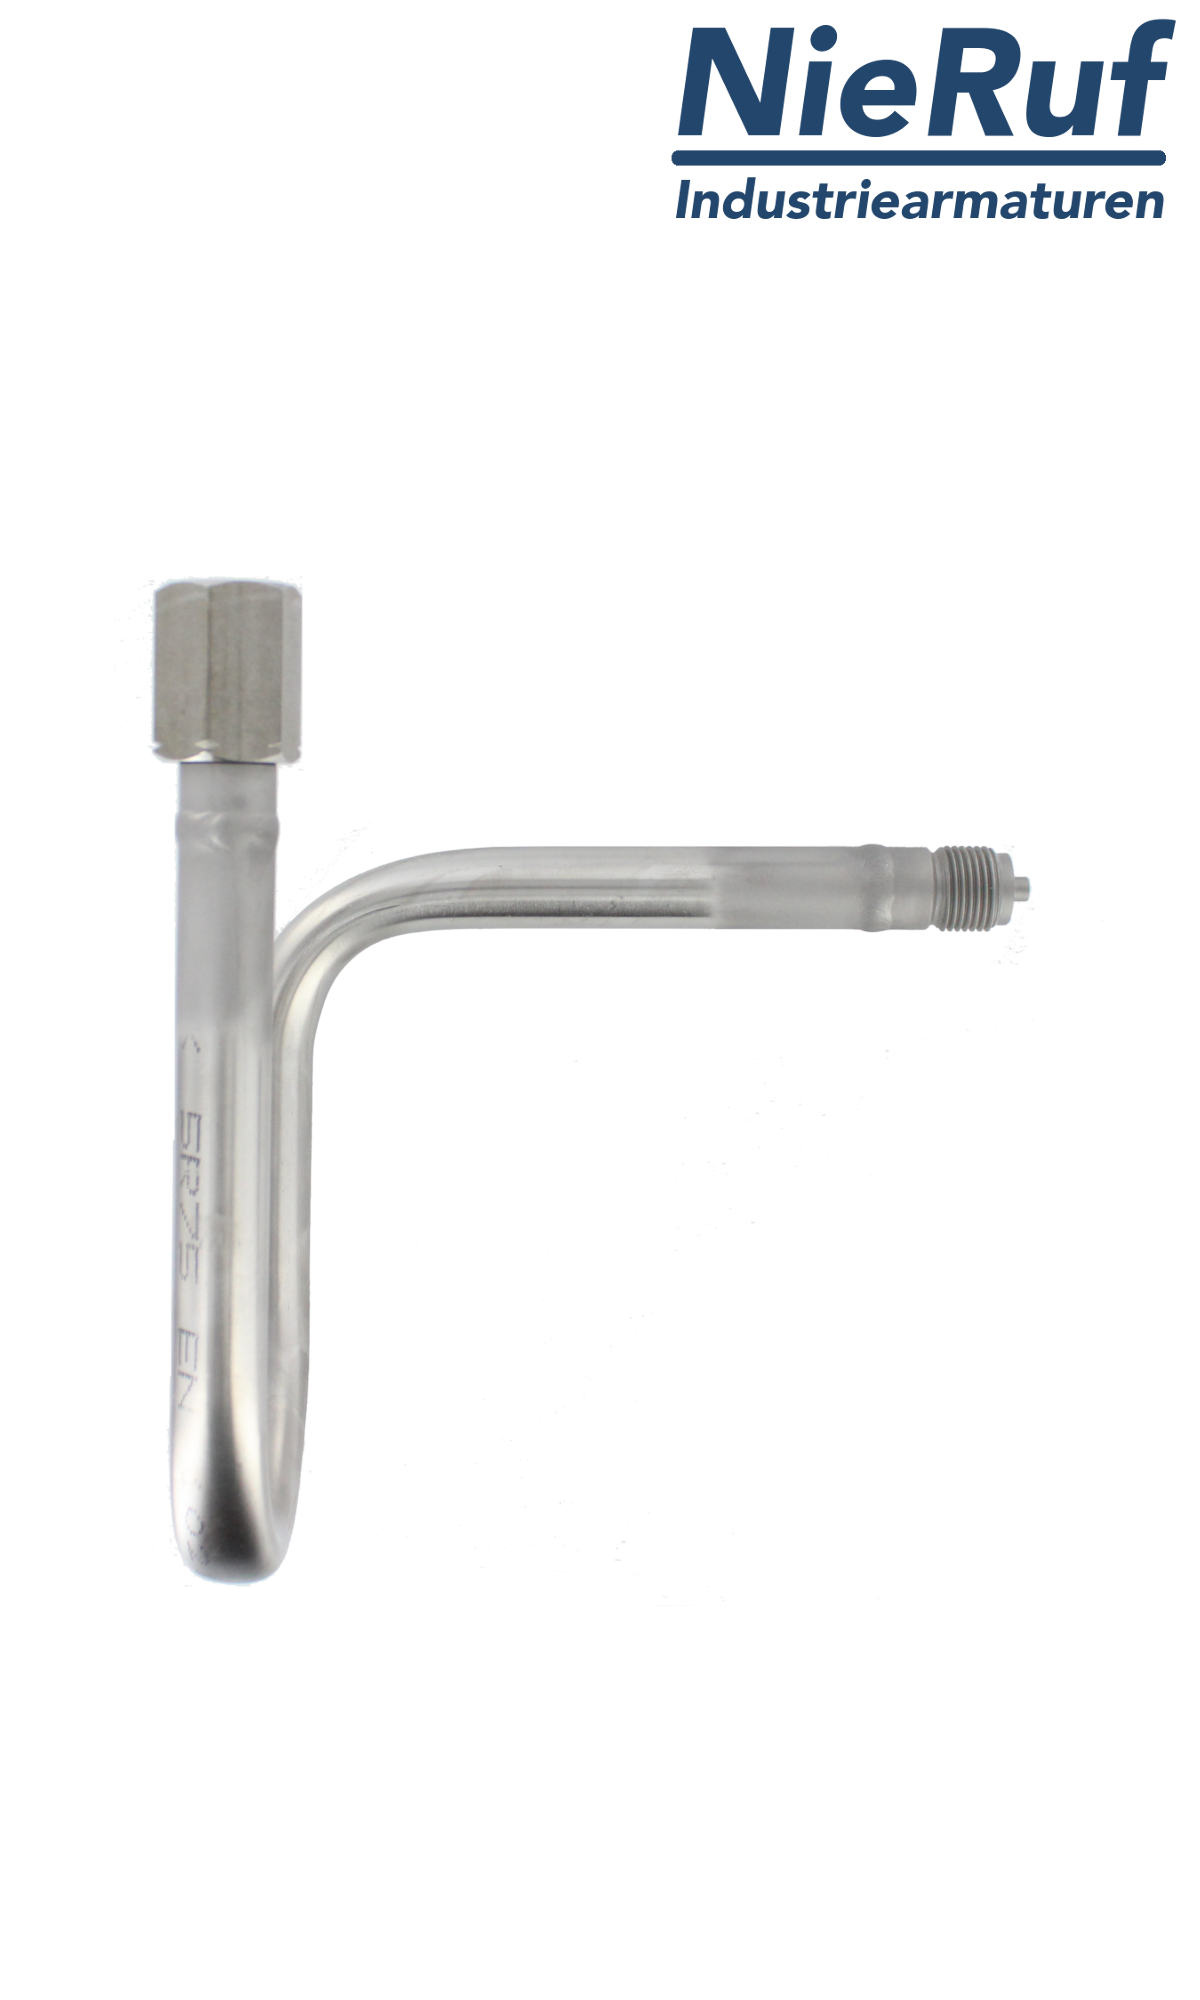 siphon in U-shape male thread x sleeve DIN 16282 - form A made of stainless steel 1.4571 1/2"